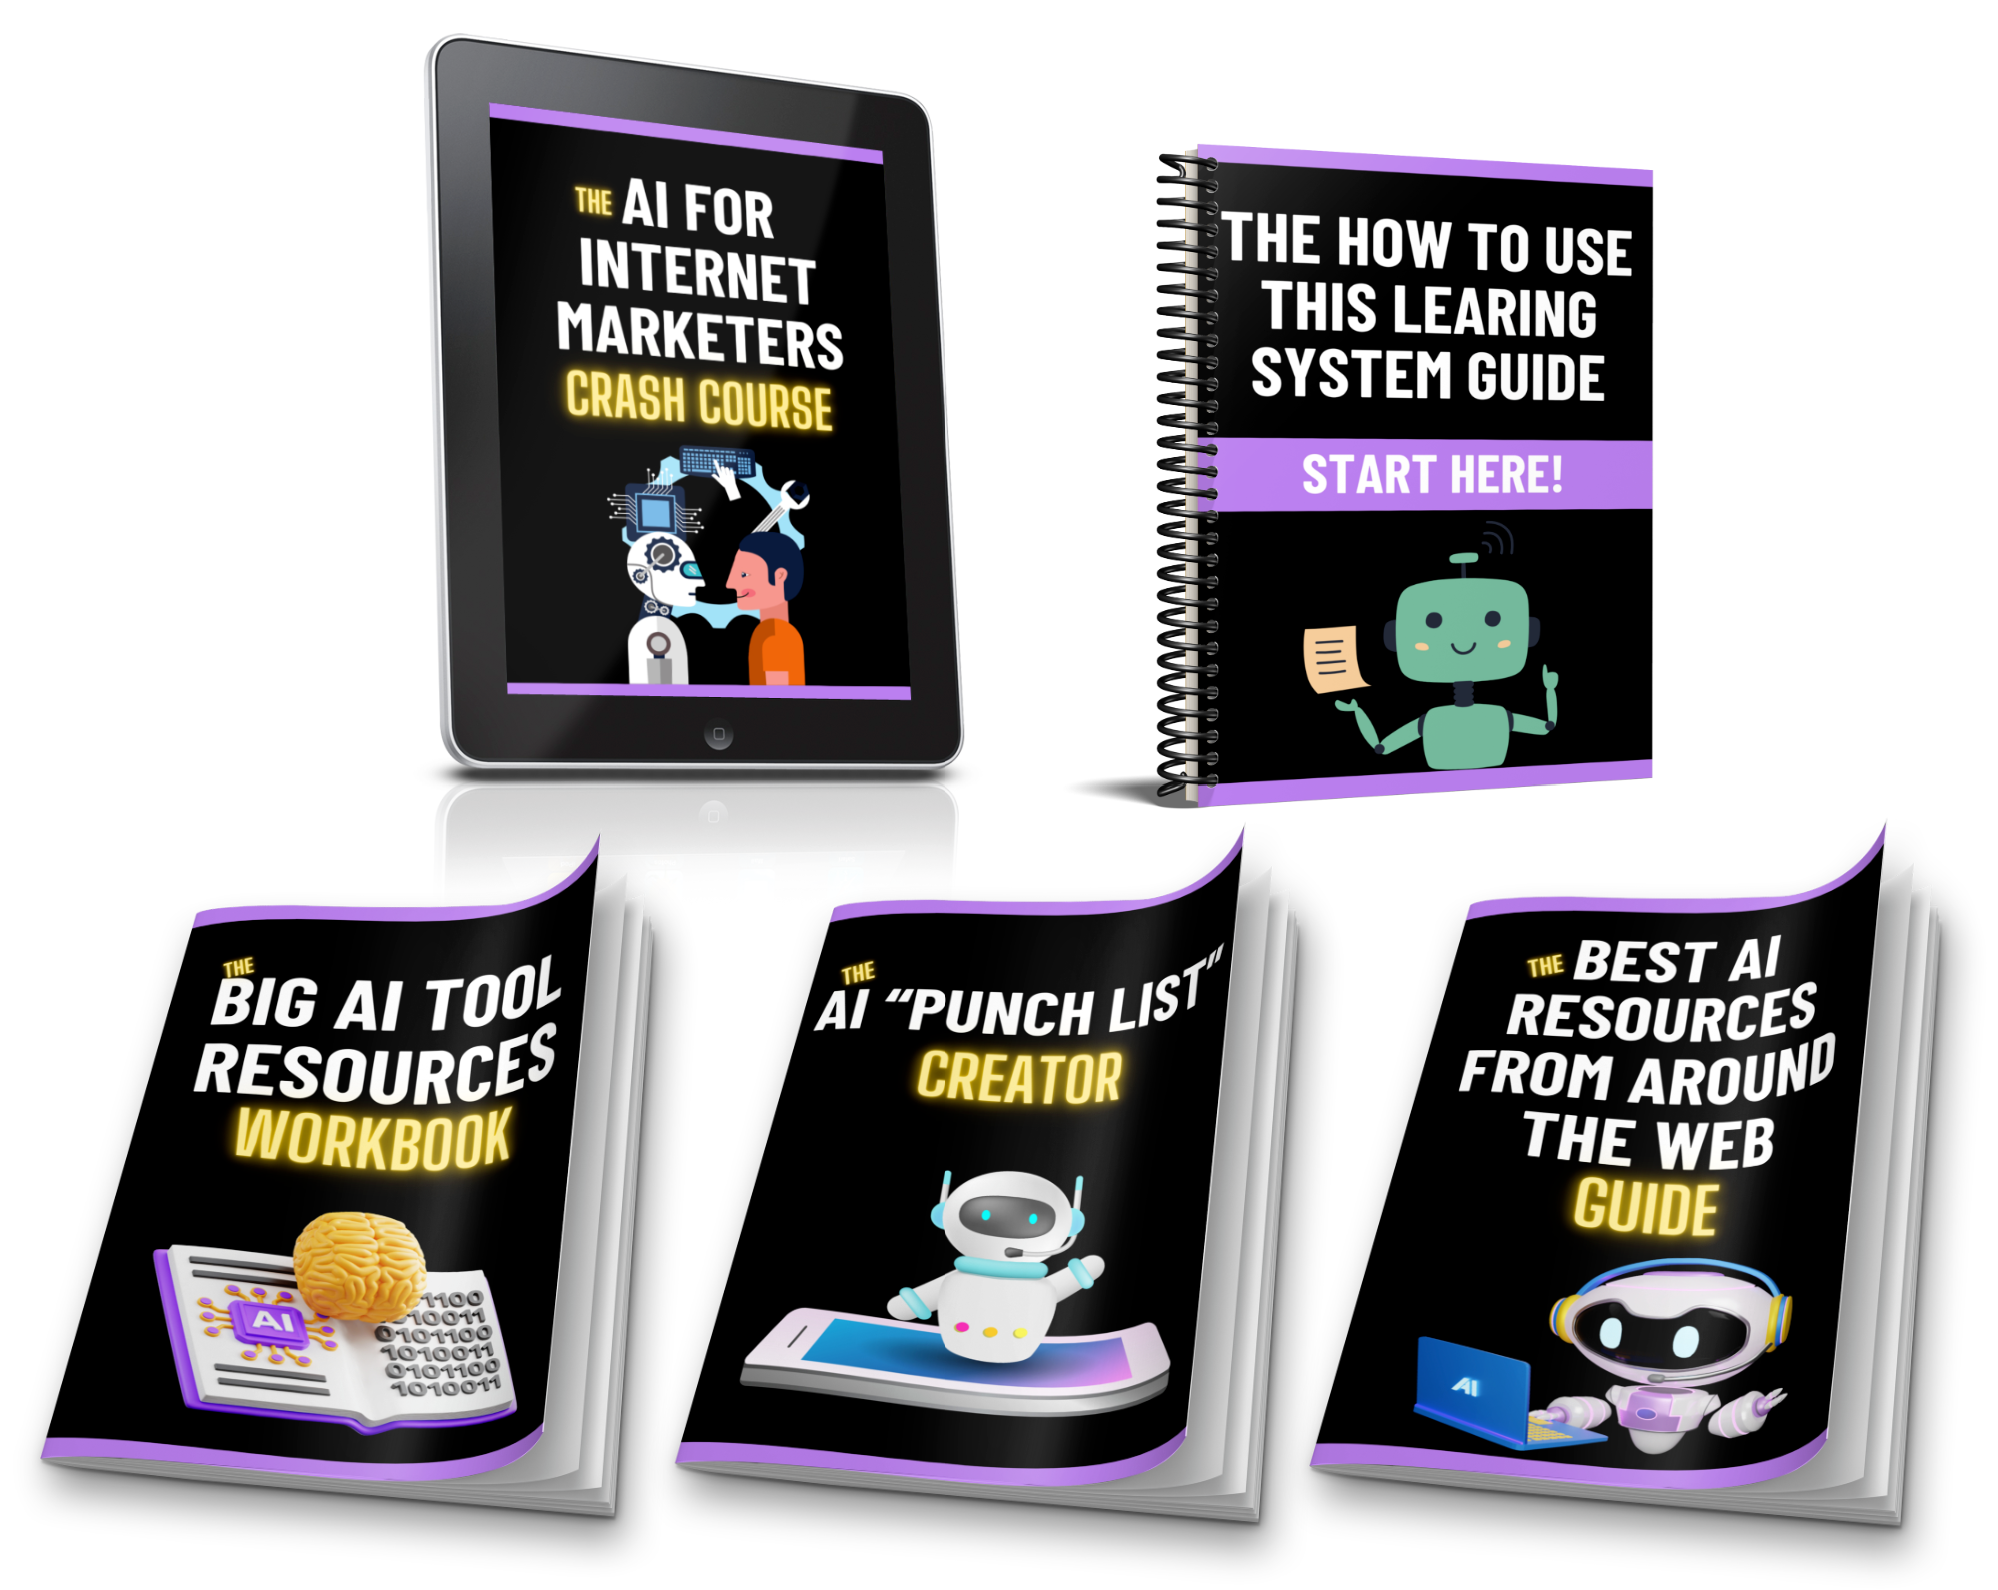 The AI For Internet Marketers Crash Course Cover